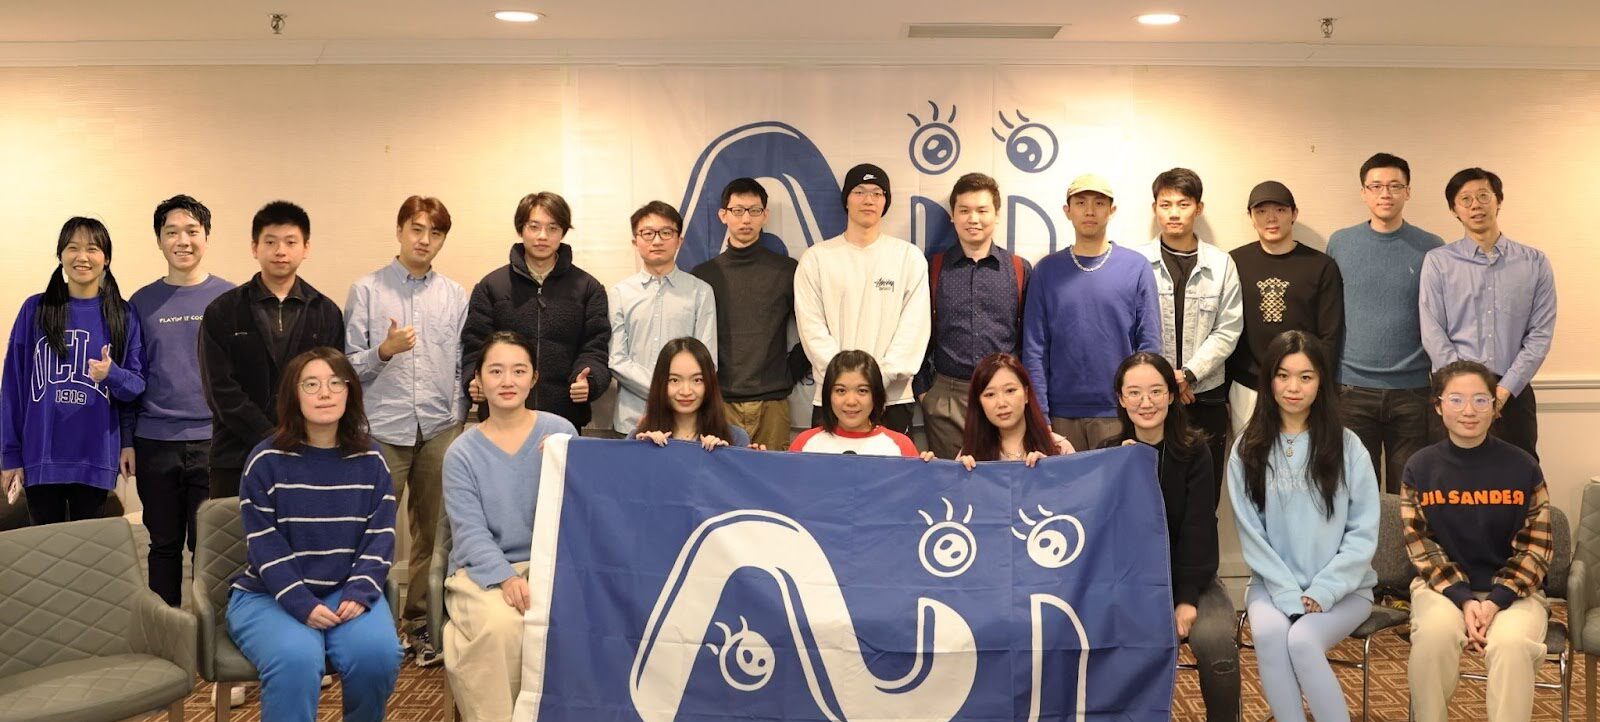 AJI Lab group photo. Members seated in the front row are holding a blue flag with the AIJ Lab logo.